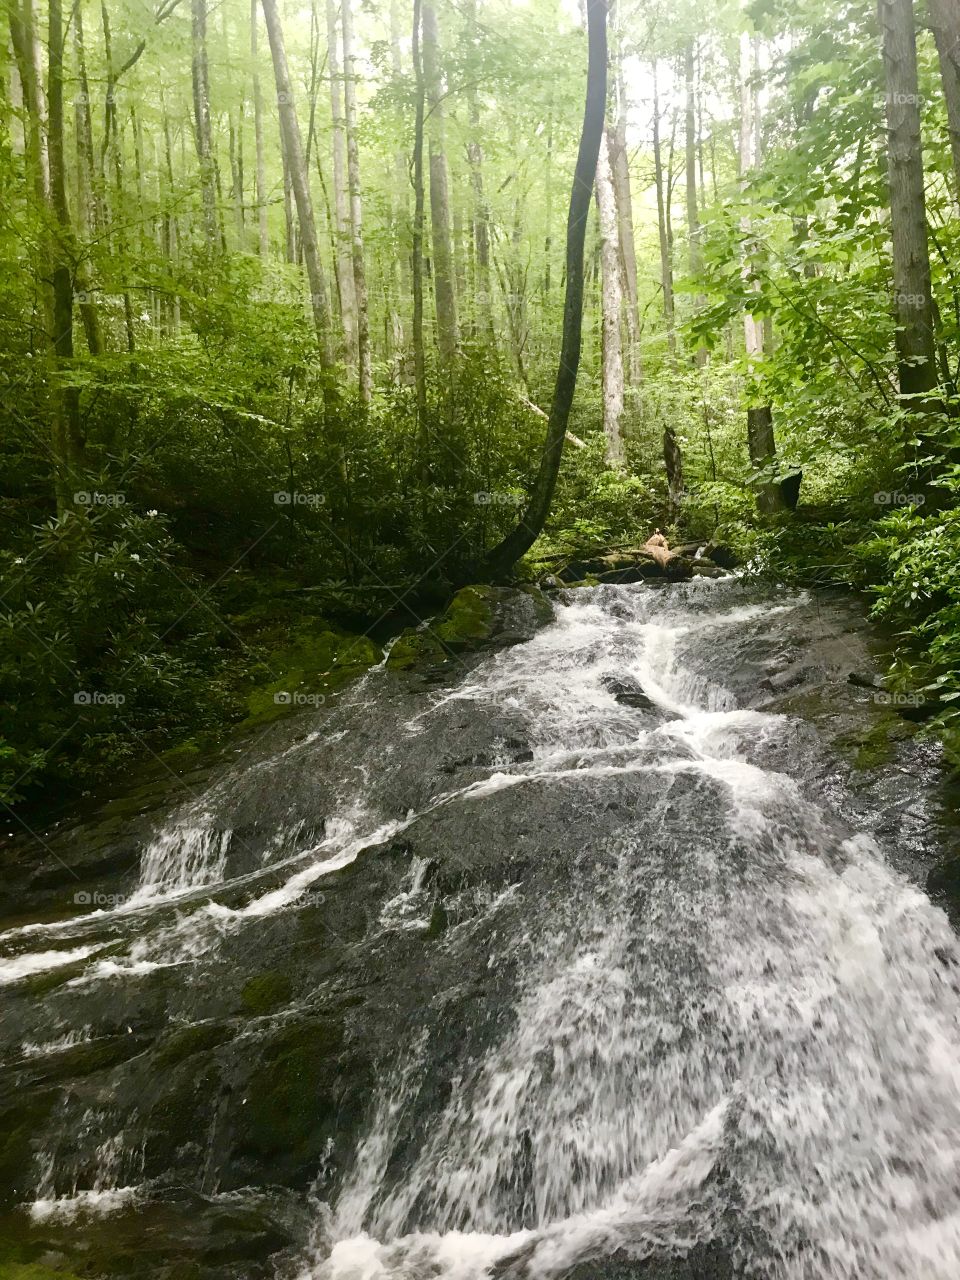 Beautiful Mother Nature blessed the Smokies with luscious vegetation and lively streams.